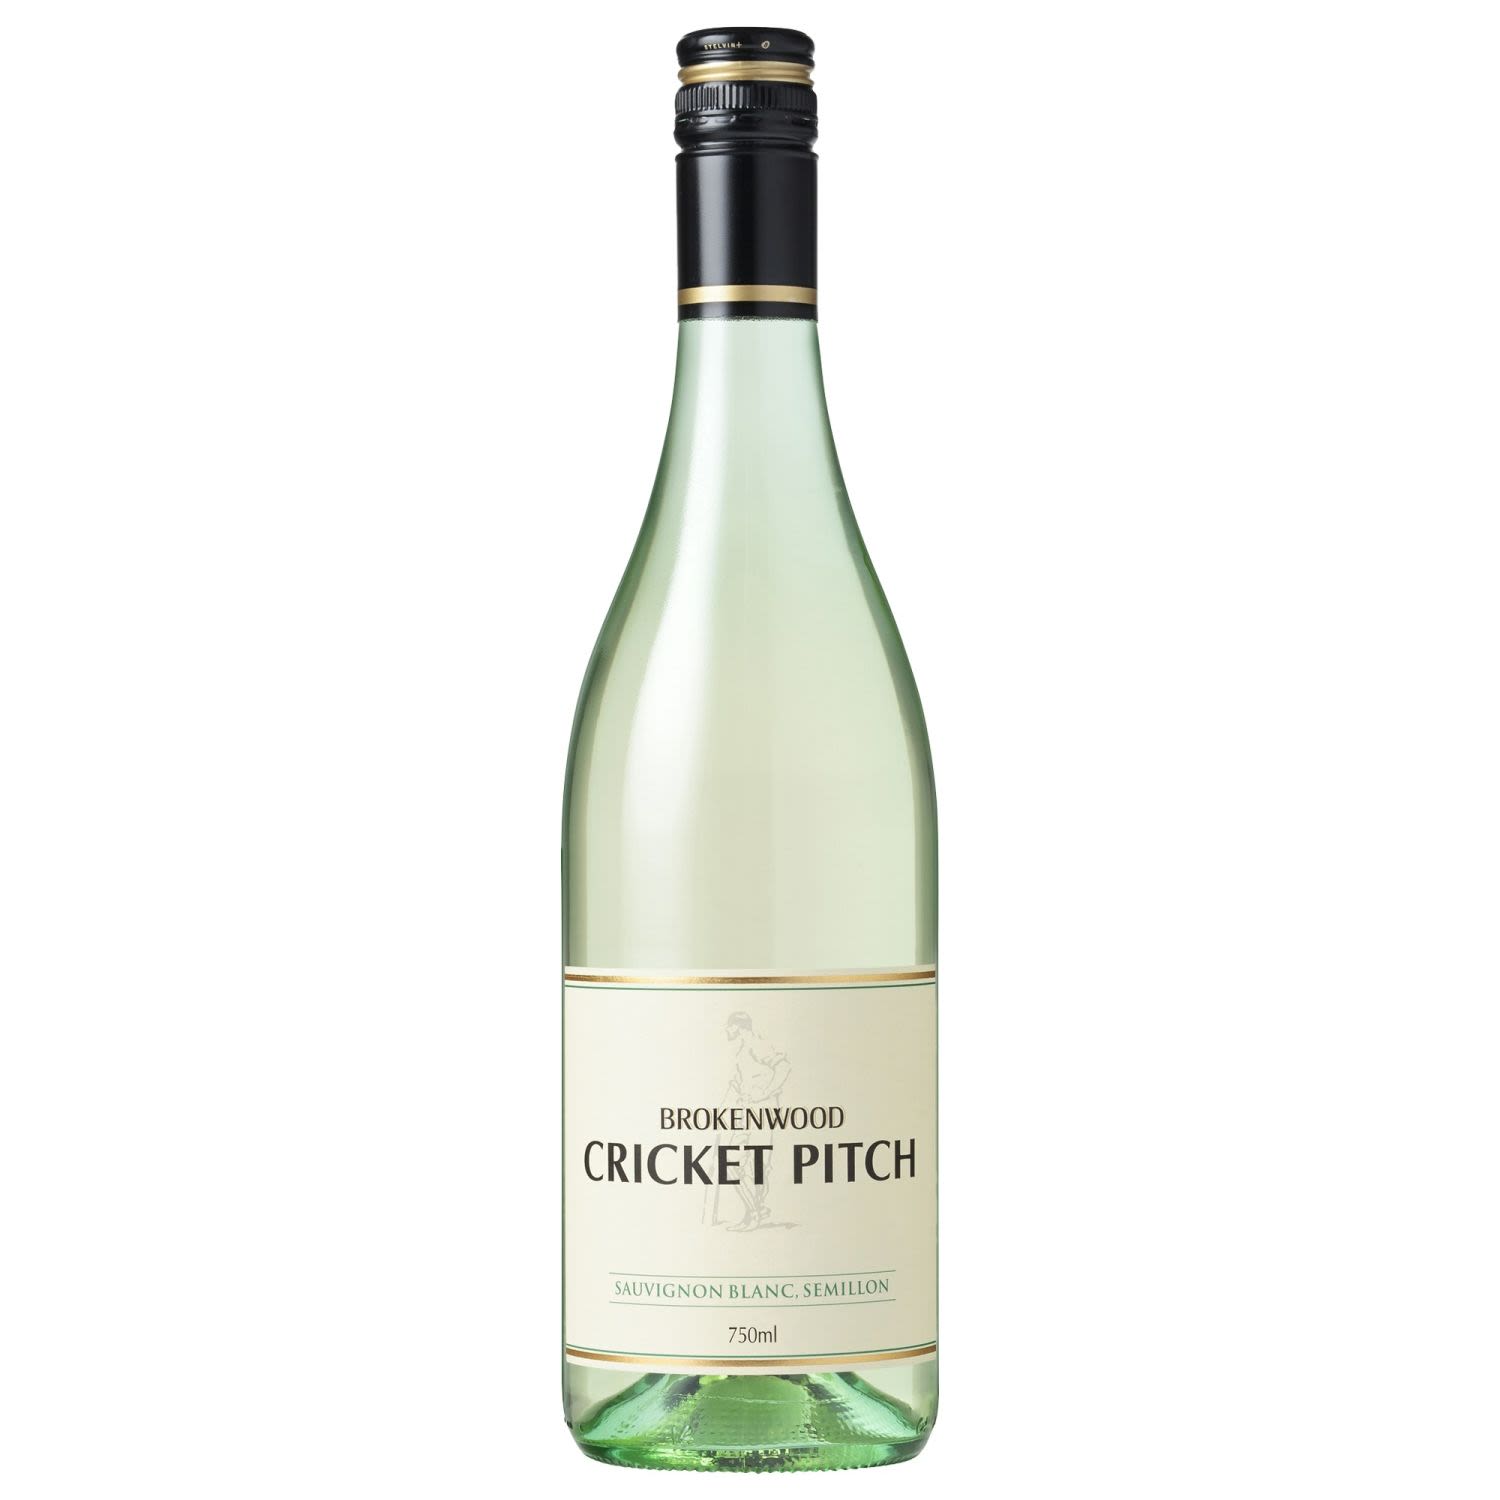 Brokenwood Cricket Pitch Sauvignon Blanc Semillon opens with lively citrus & hints of tropical fruits on the nose. The palate is full of life. Fresh, herbaceous & citrus again with a creamy mid-palate that finishes long & full of energy. A beautifully crafted wine to enjoy in its youth.<br /> <br />Alcohol Volume: 12.50%<br /><br />Pack Format: Bottle<br /><br />Standard Drinks: 7.4</br /><br />Pack Type: Bottle<br /><br />Country of Origin: Australia<br /><br />Region: South Eastern Australia<br /><br />Vintage: Vintages Vary<br />